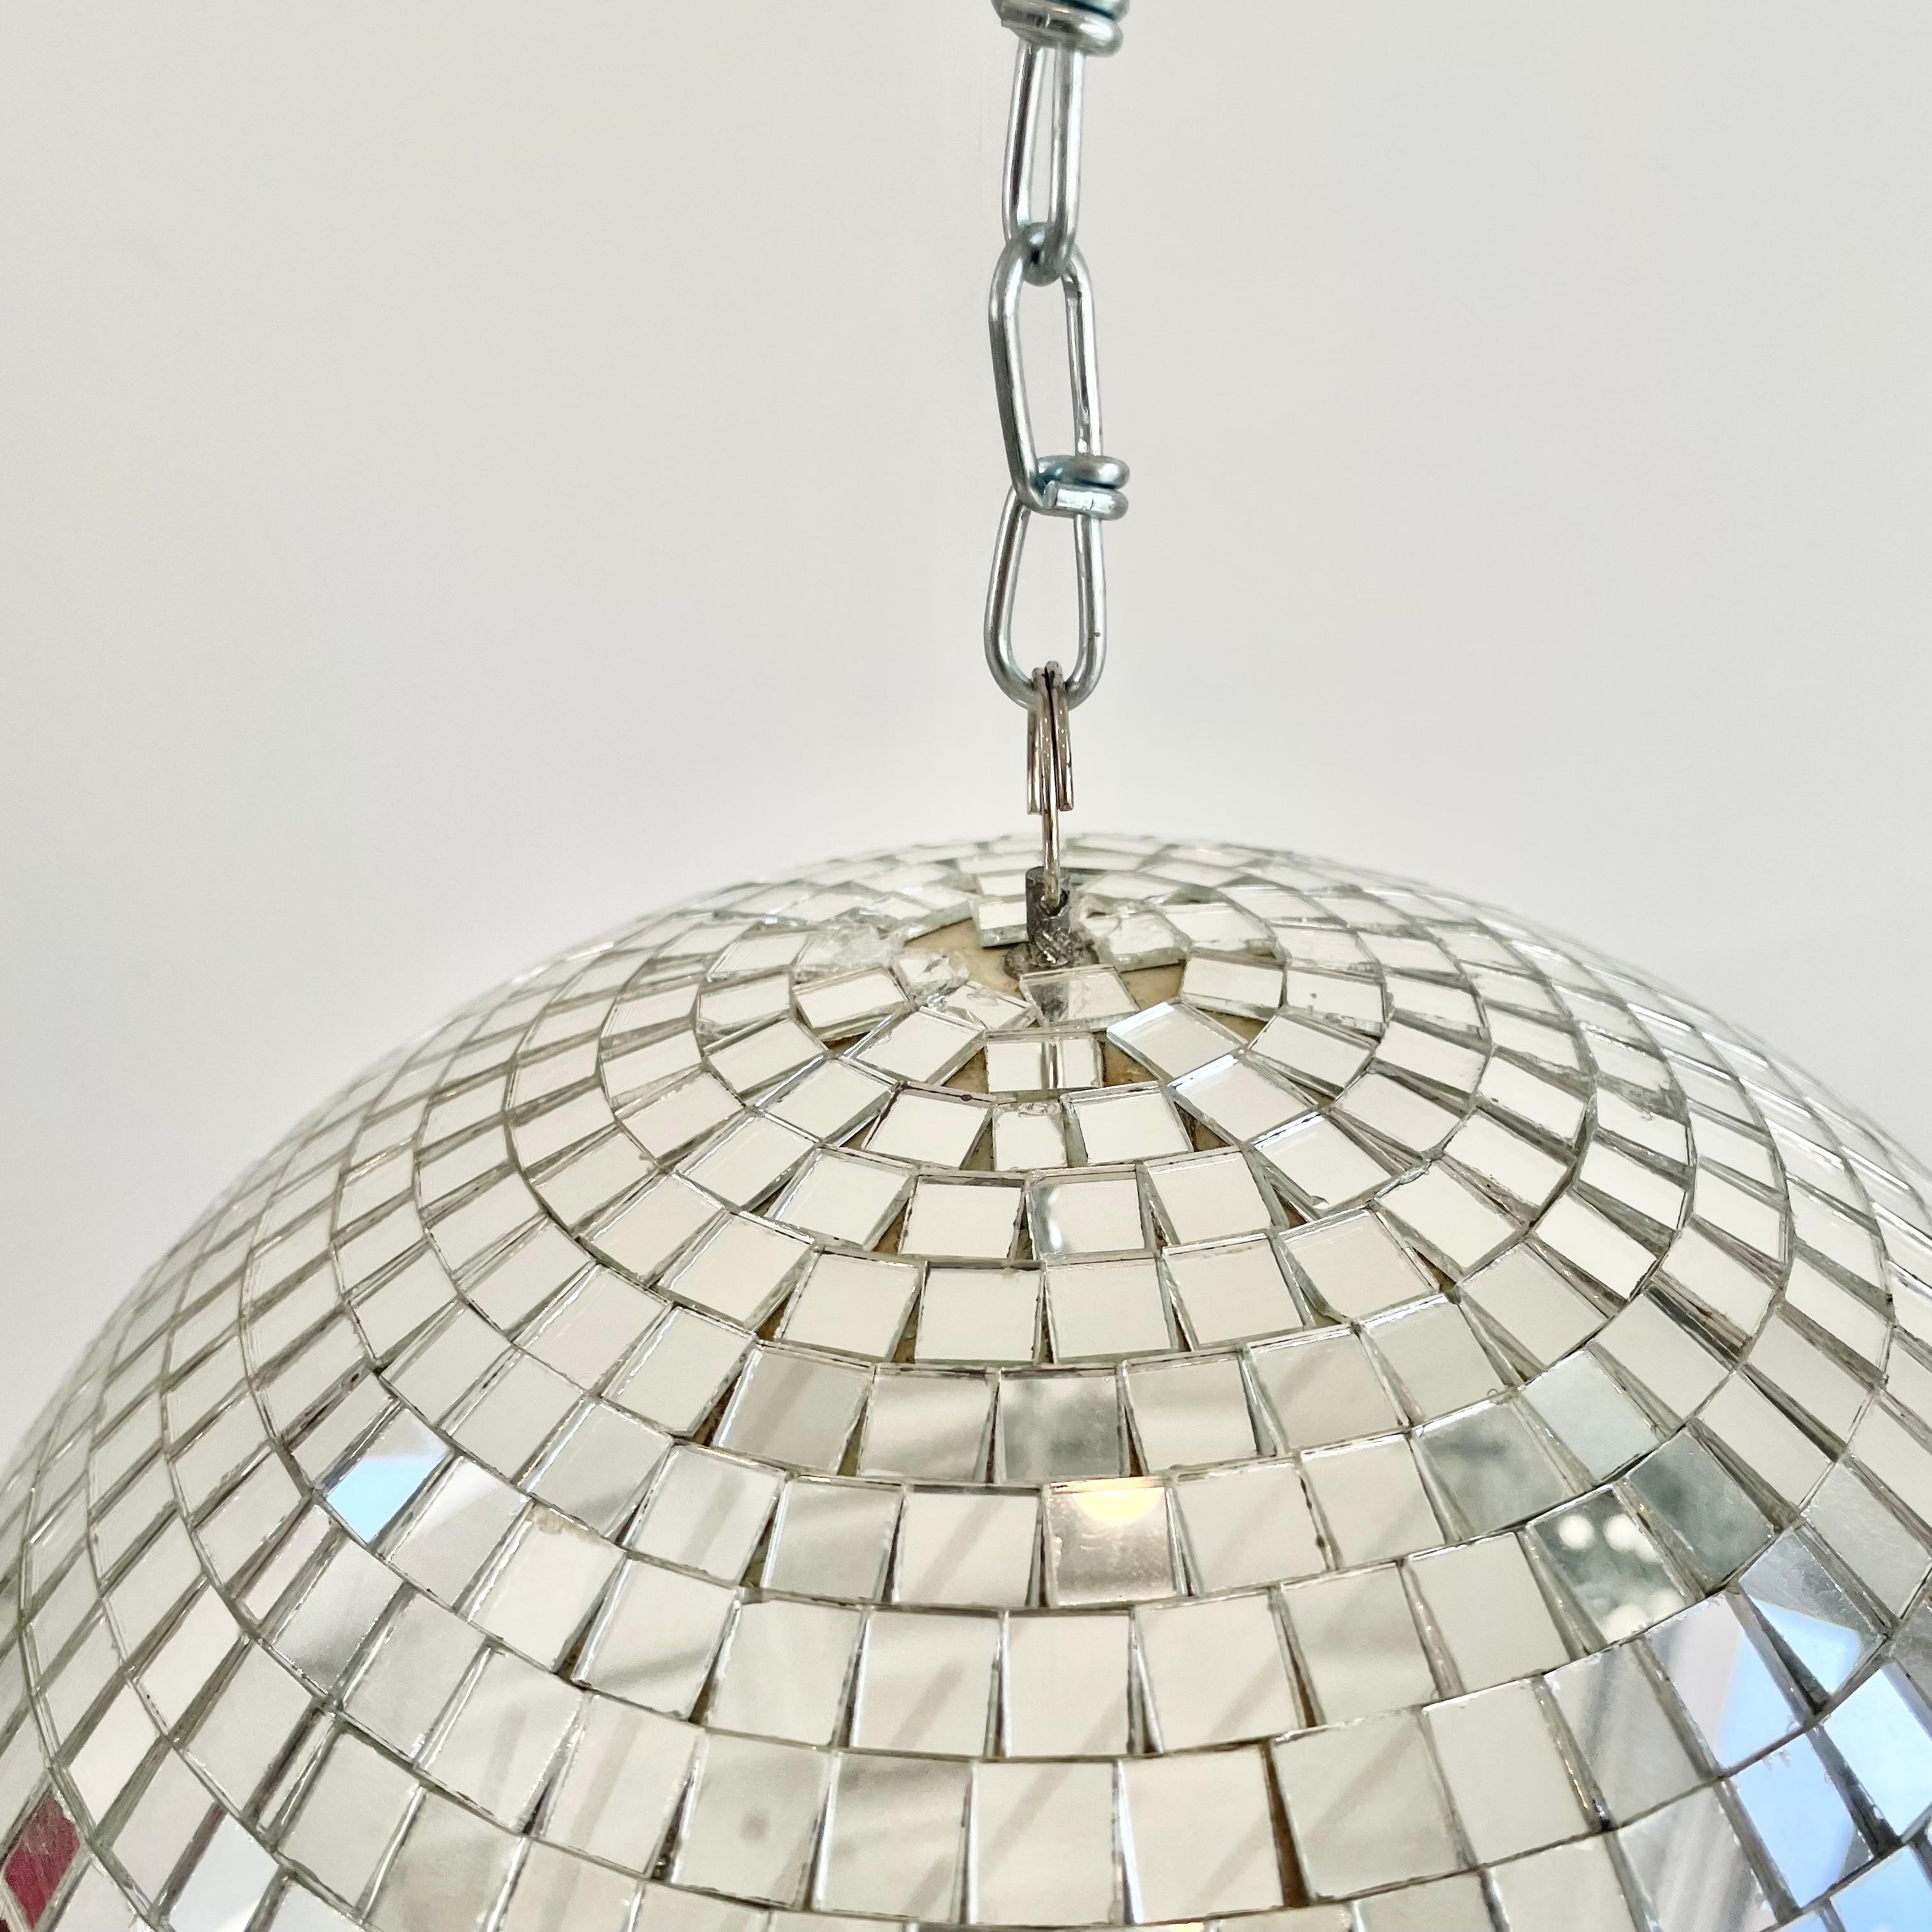 Medium sized retro disco ball made out of small individually cut square pieces of glass giving it a great look. Good condition. Illuminates beautifully. Has a metal ring at the top which is connected to a 3 foot long silver chain link which can be